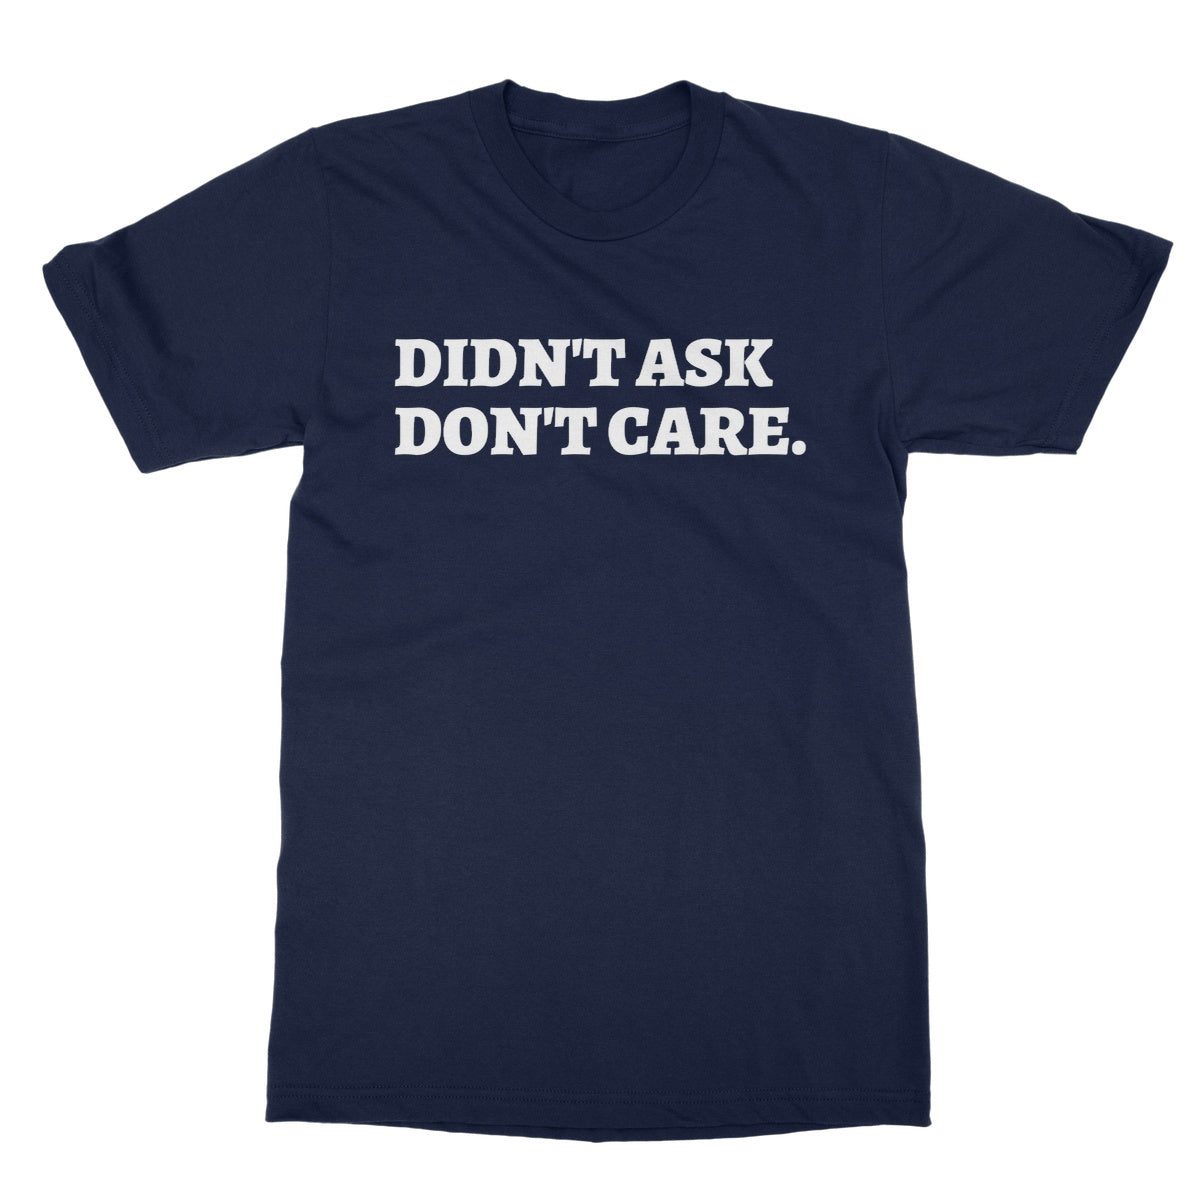 didn't ask don't care t shirt navy